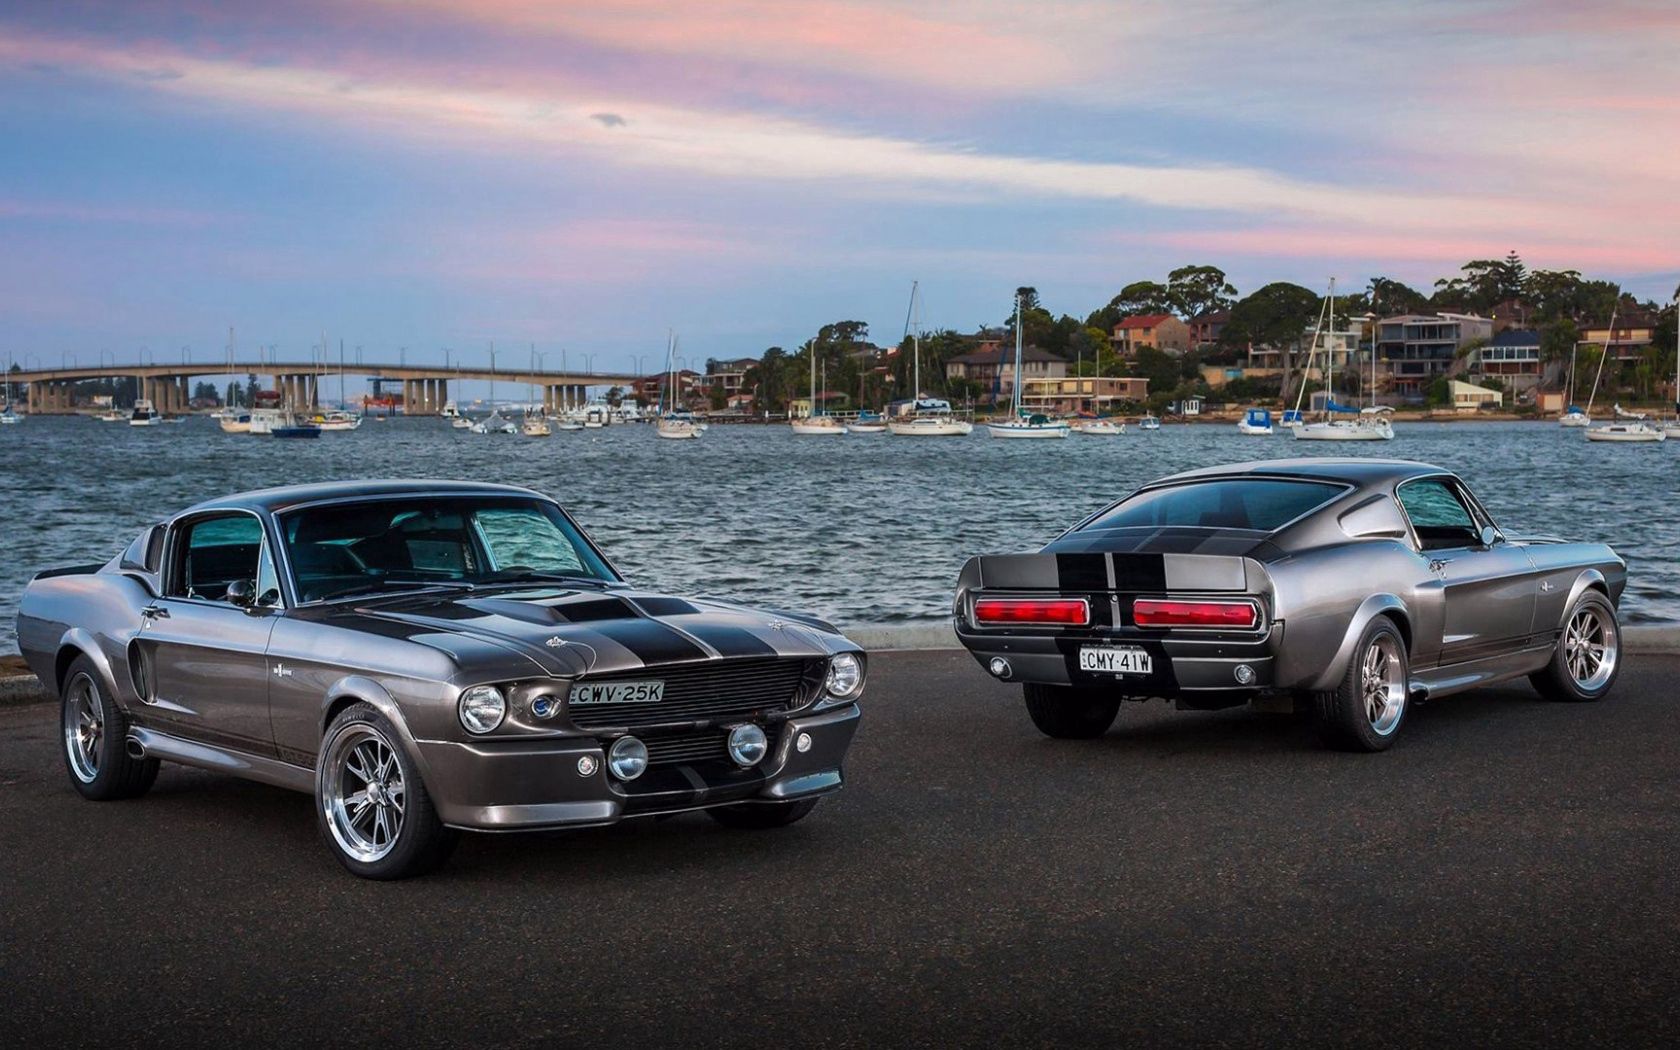 mustang, sea, ford, cars, silver, silvery